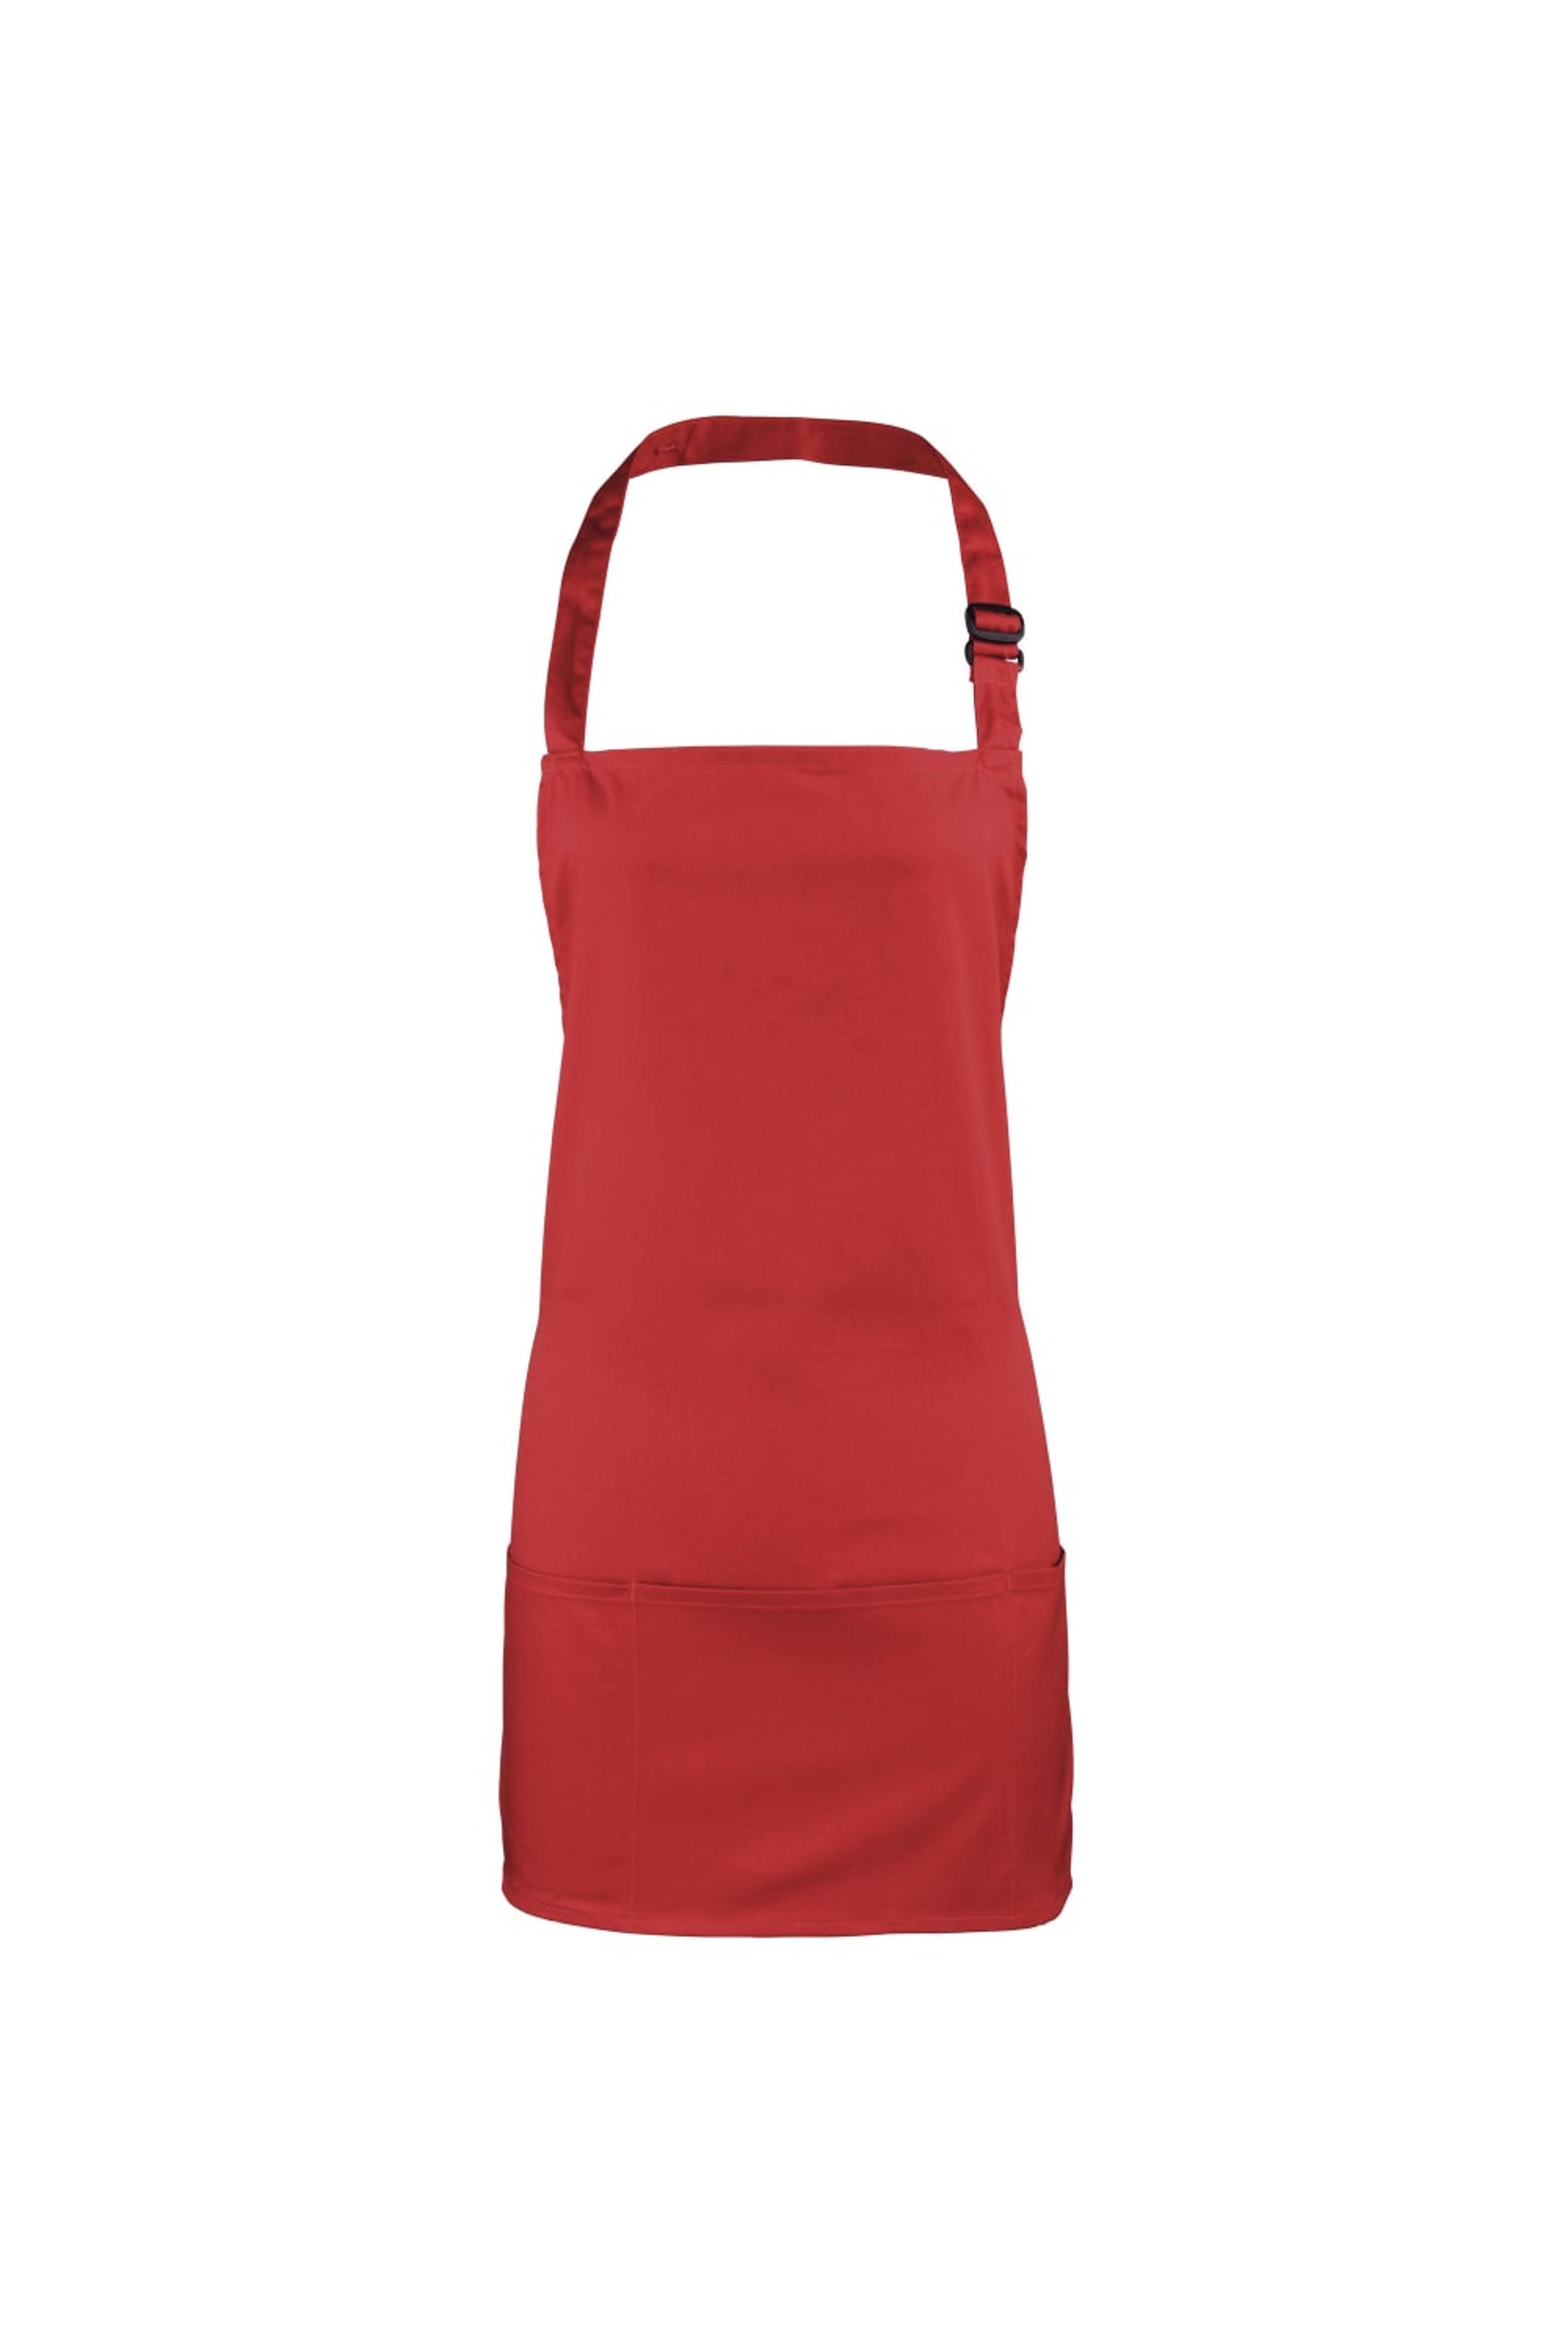 PREMIER PREMIER COLOURS 2-IN-1 APRON / WORKWEAR (RED) (ONE SIZE)